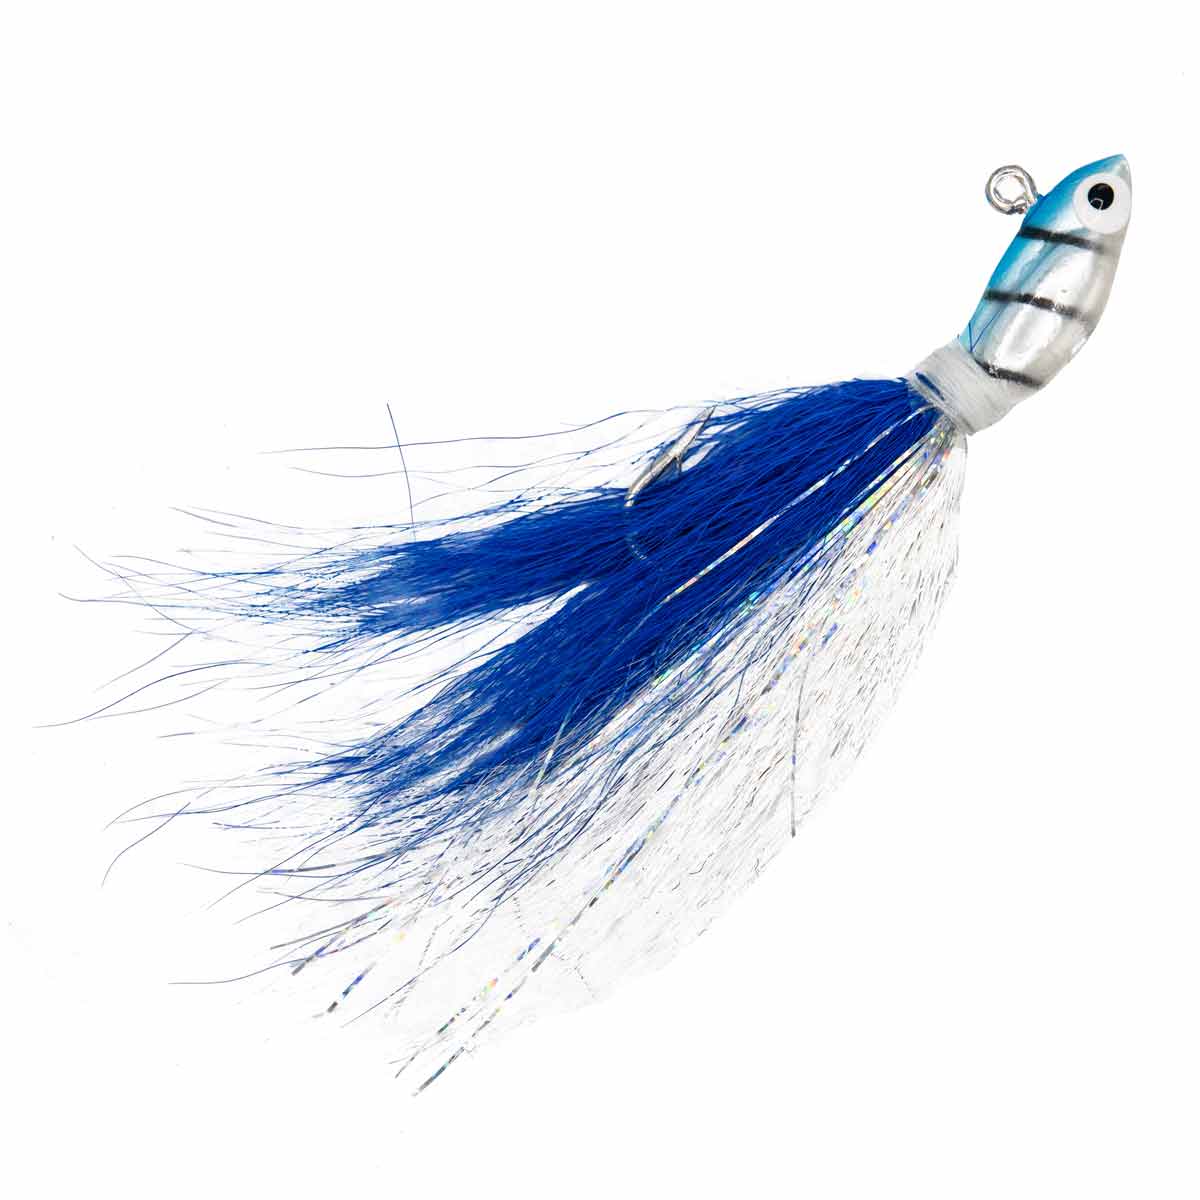 Spro Bucktail Jig Review (Where To Use Them & How To Rig Them